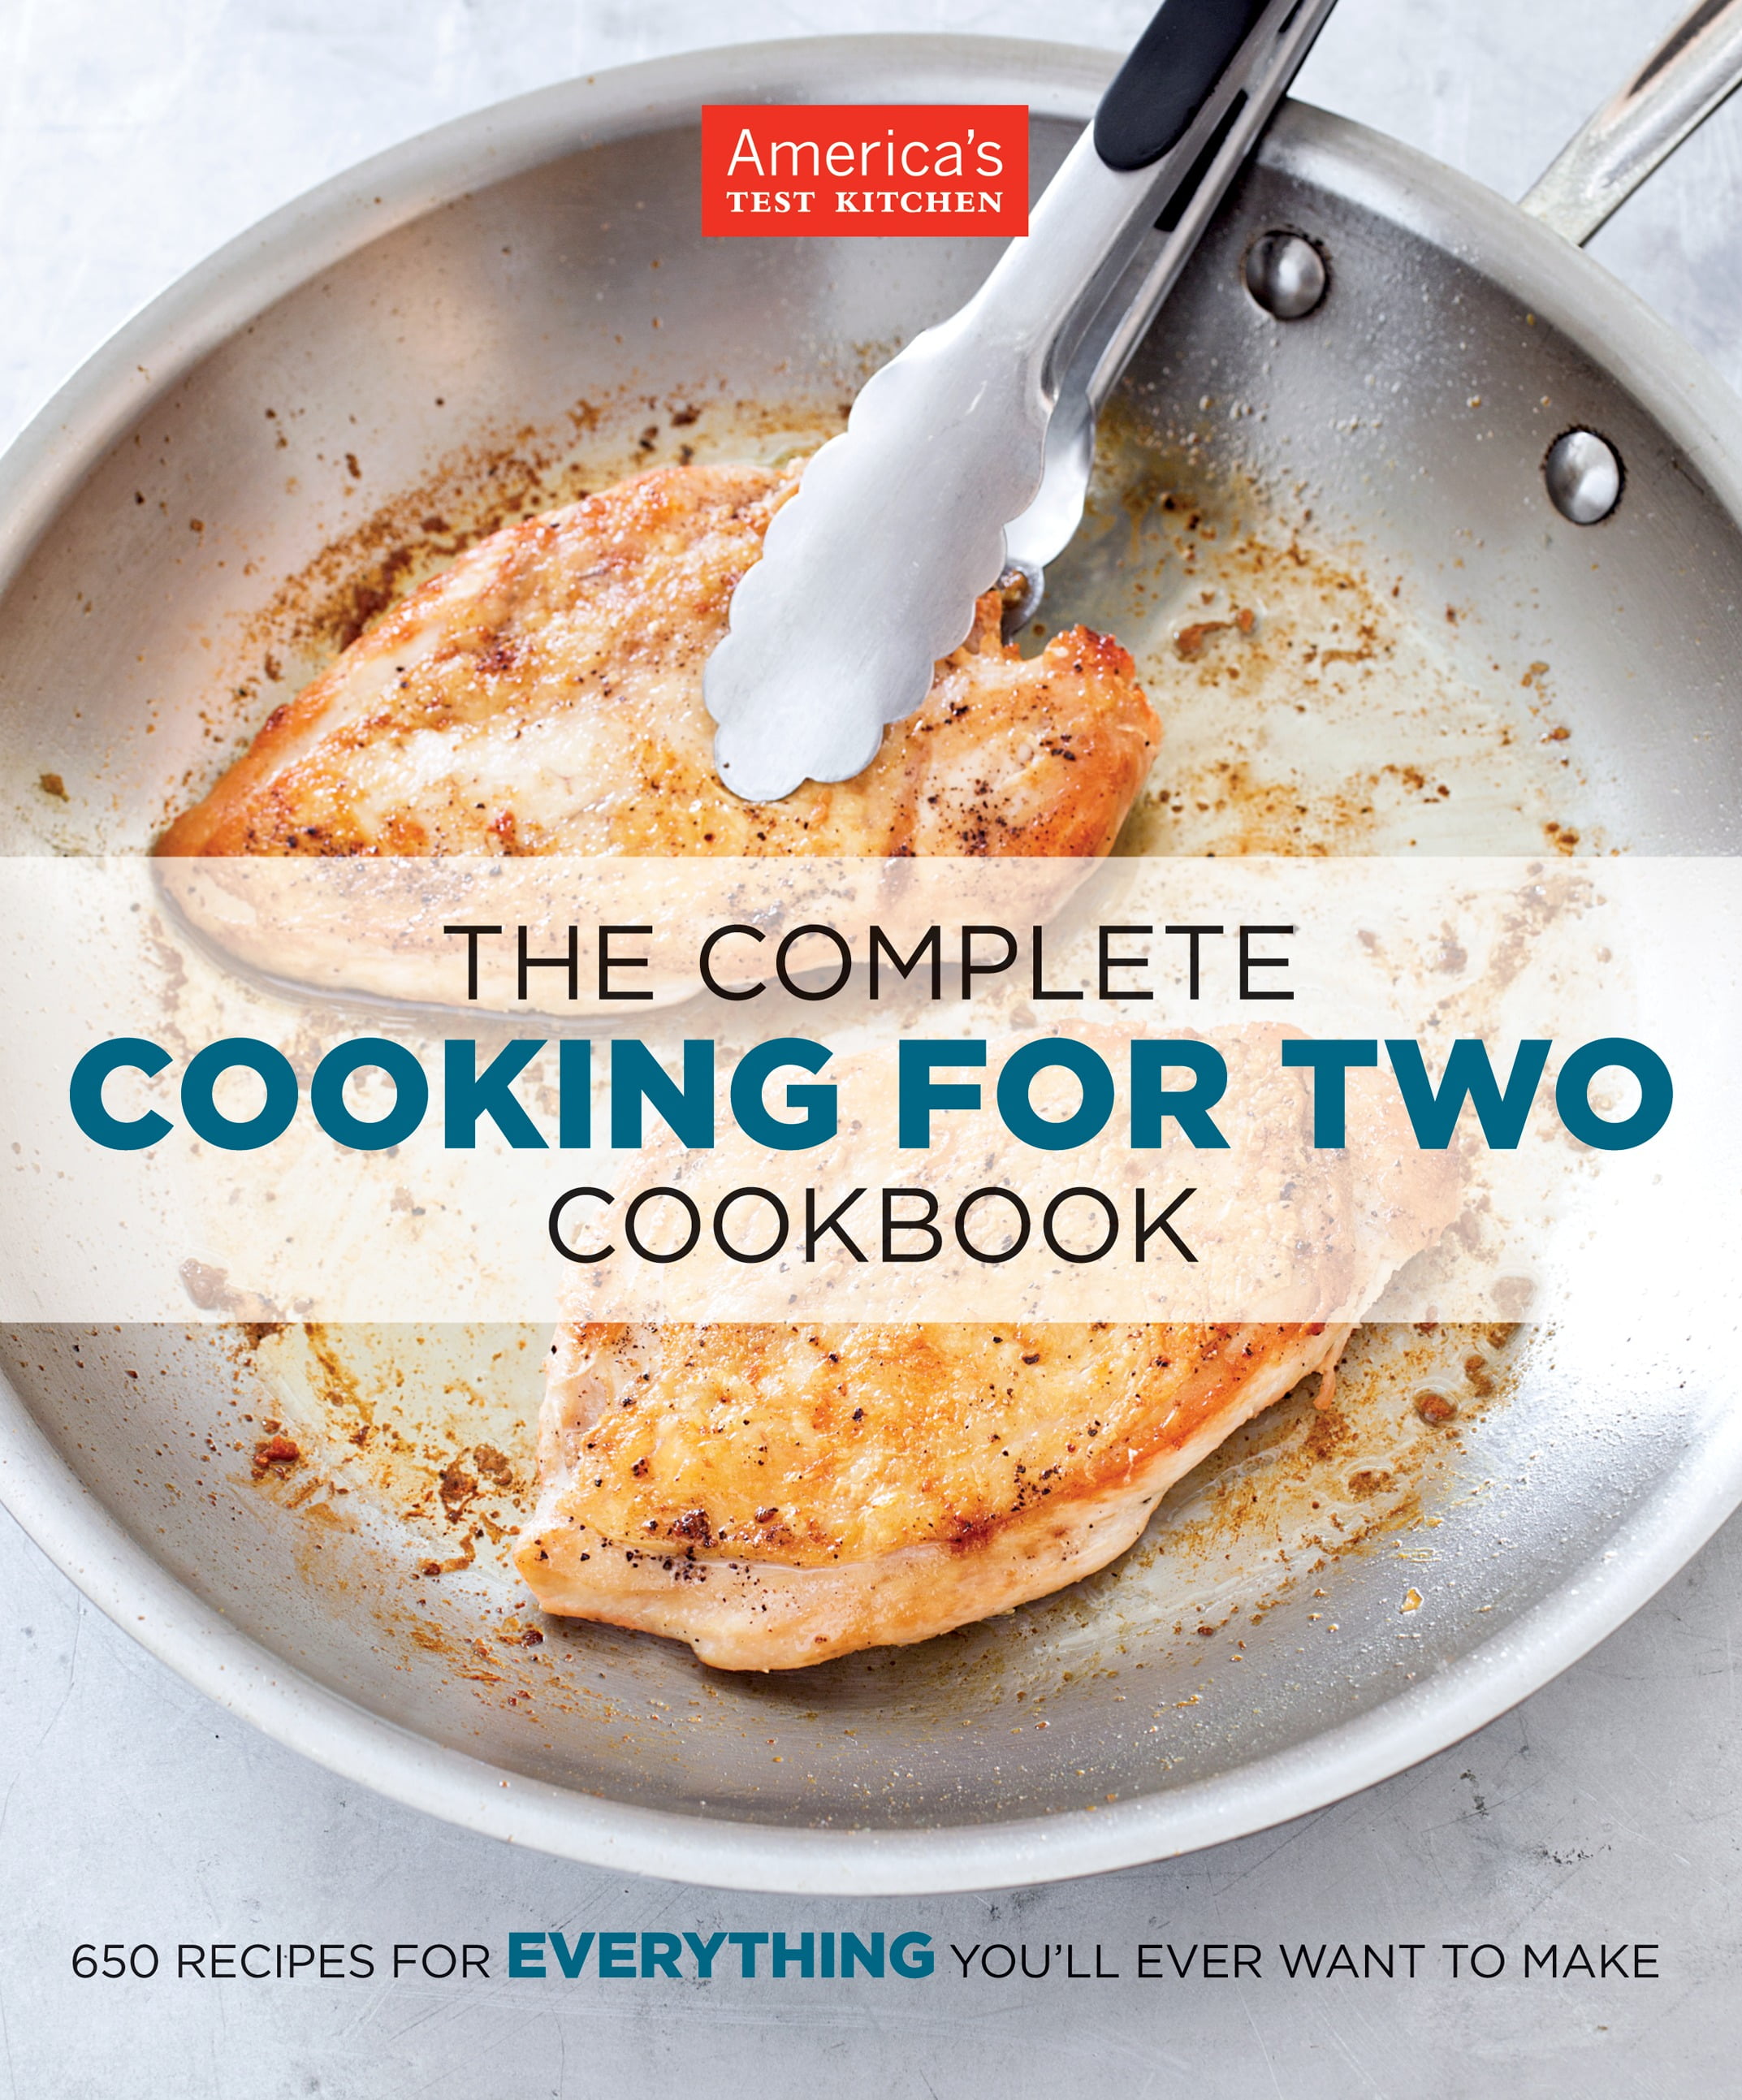 The Complete Cooking For Two Cookbook 650 Recipes For Everything